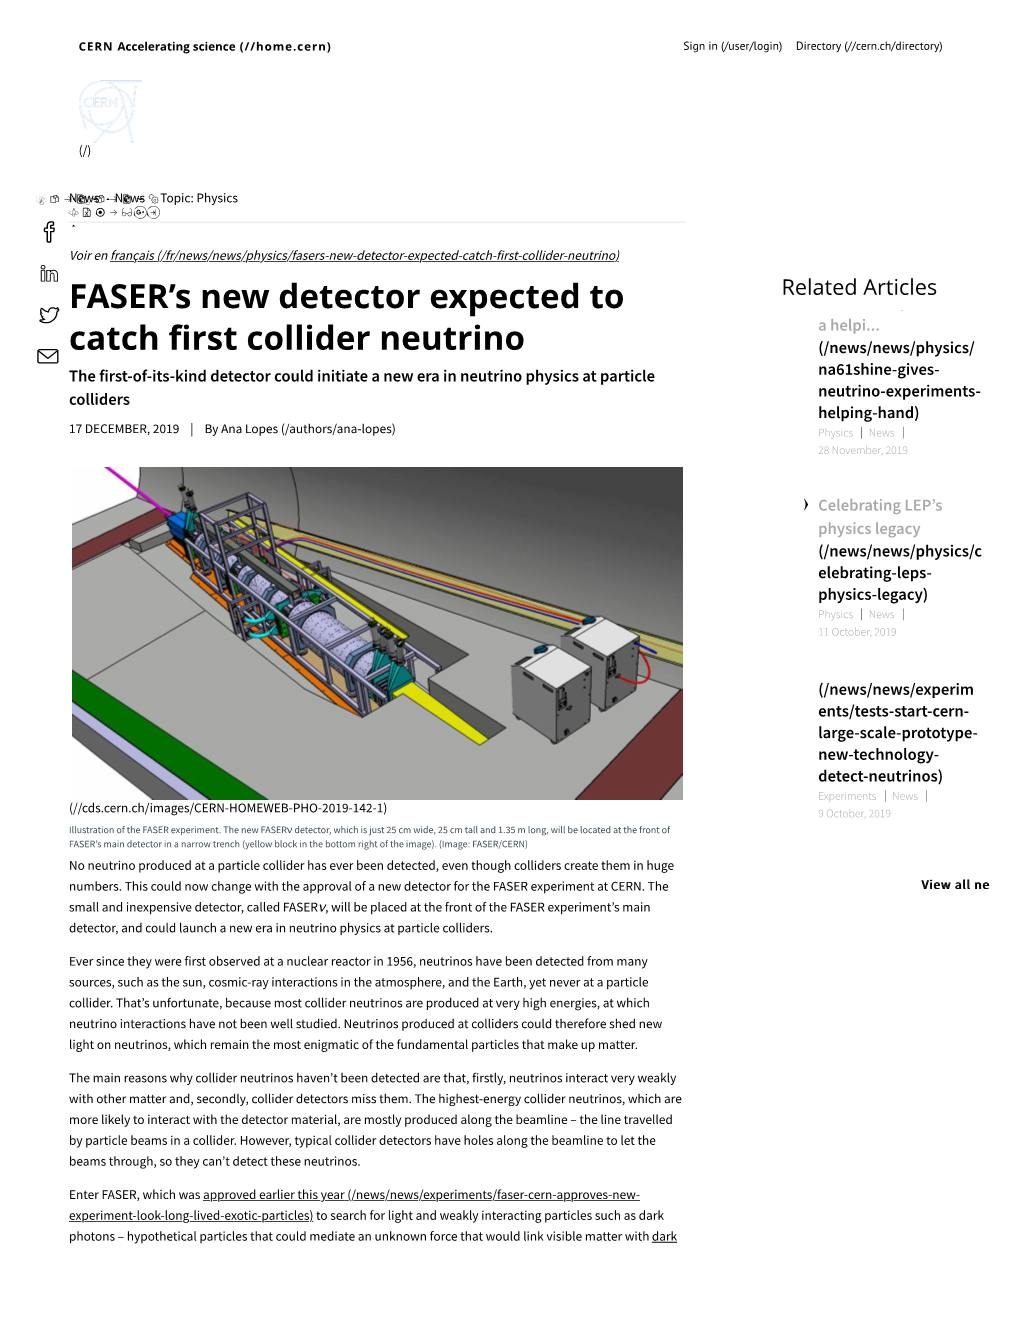 FASER's New Detector Expected to Catch First Collider Neutrino | CERN